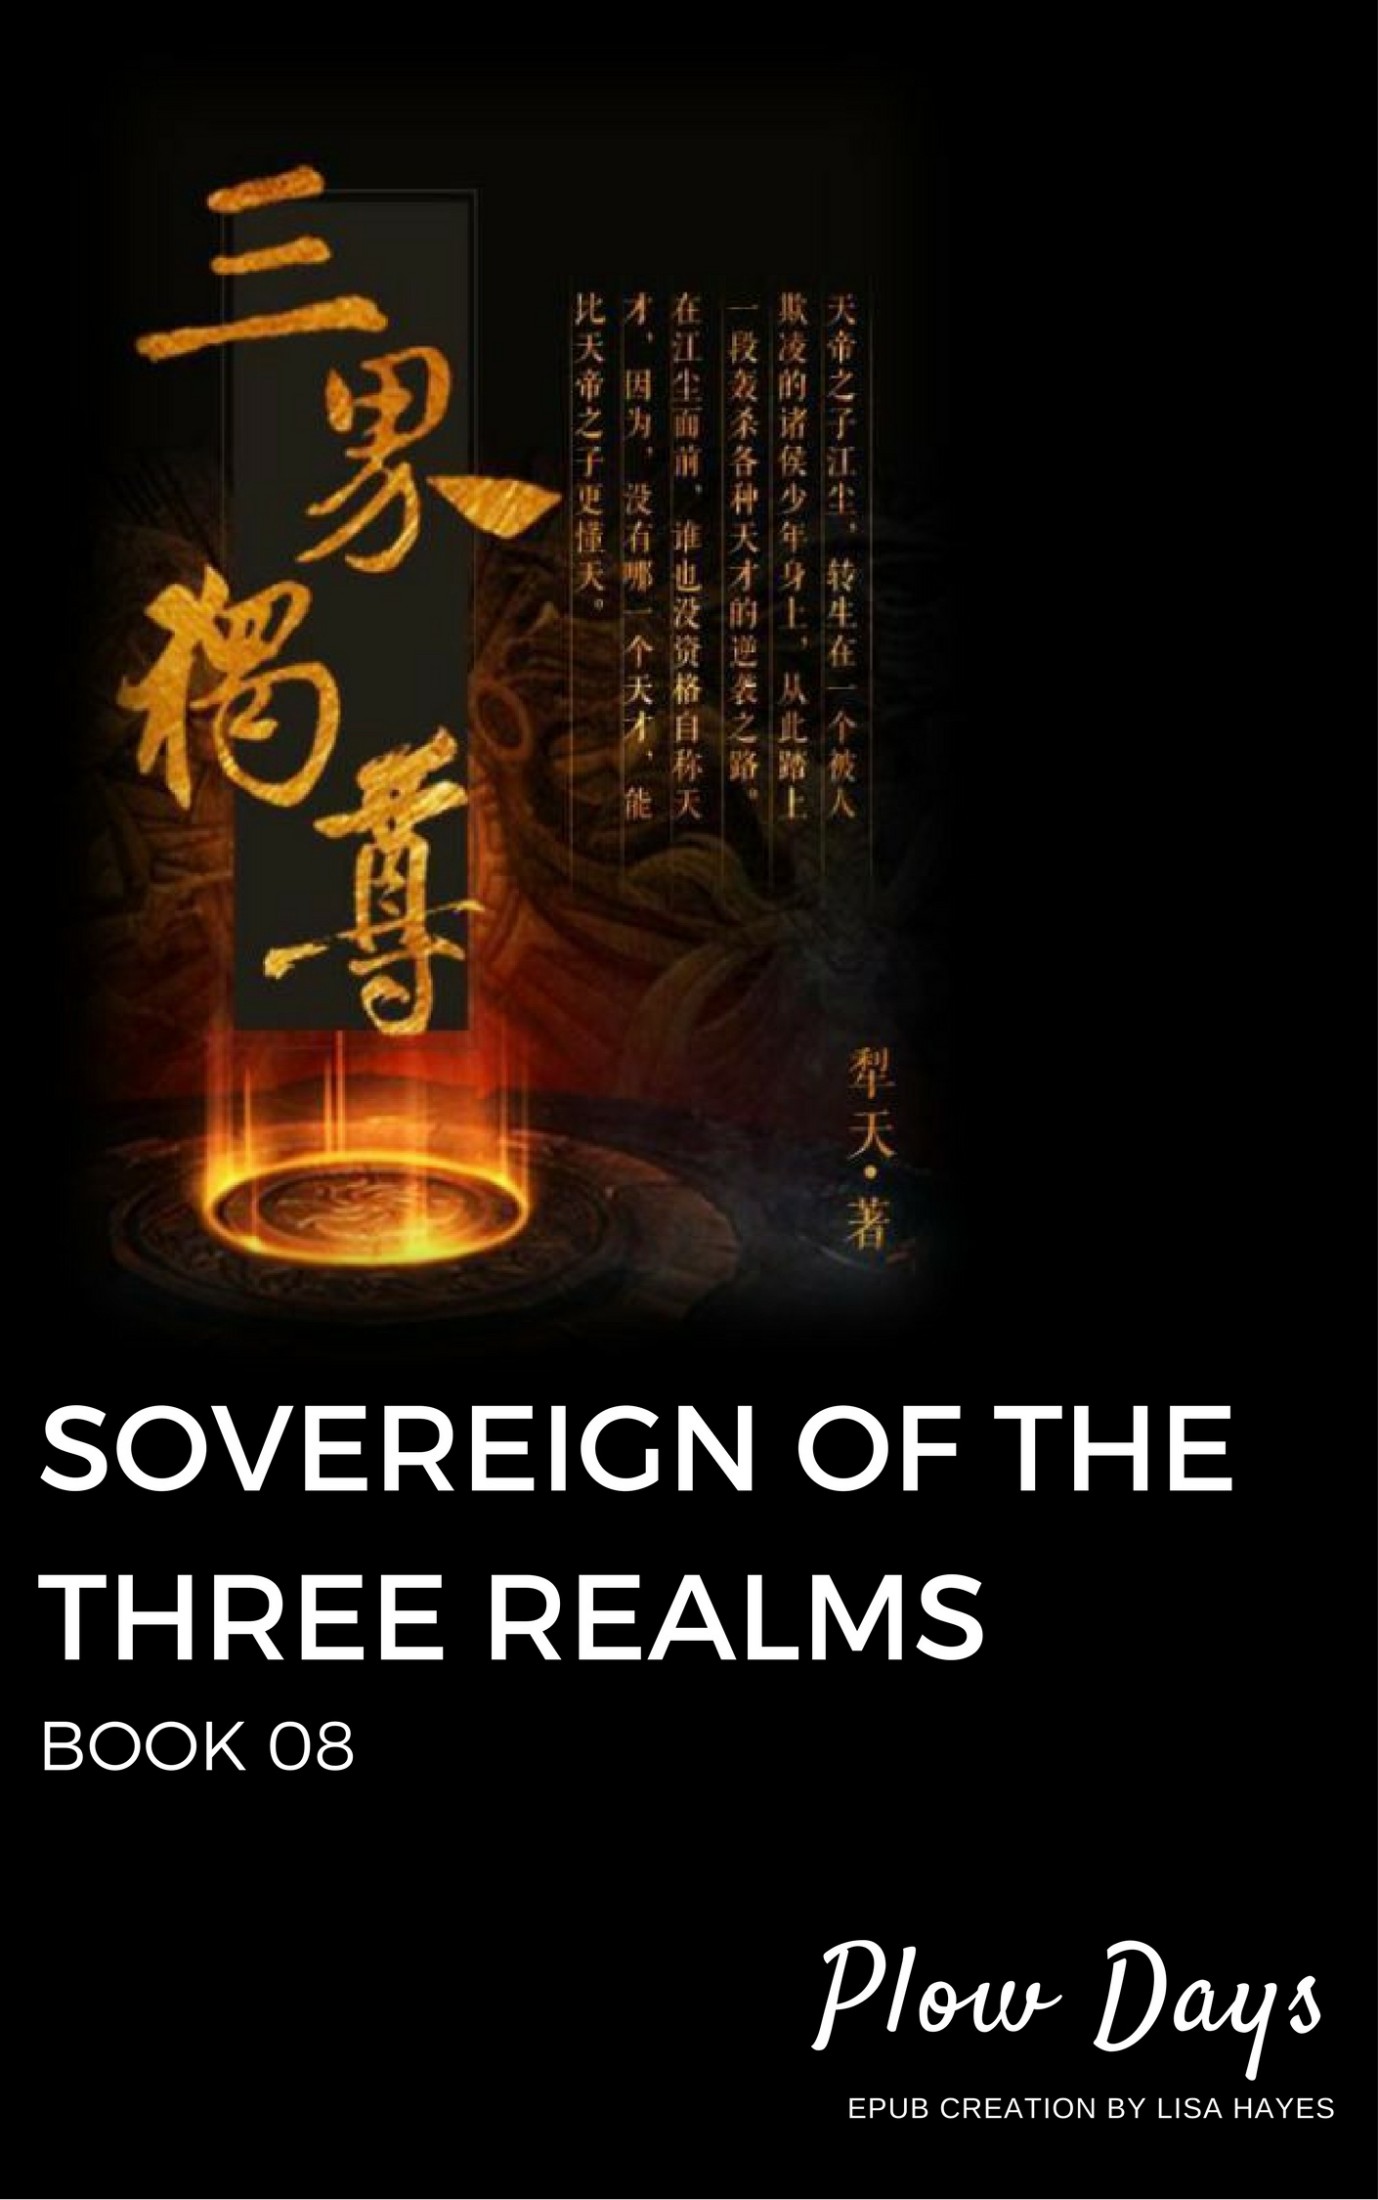 Sovereign of the Three Realms: Book 08